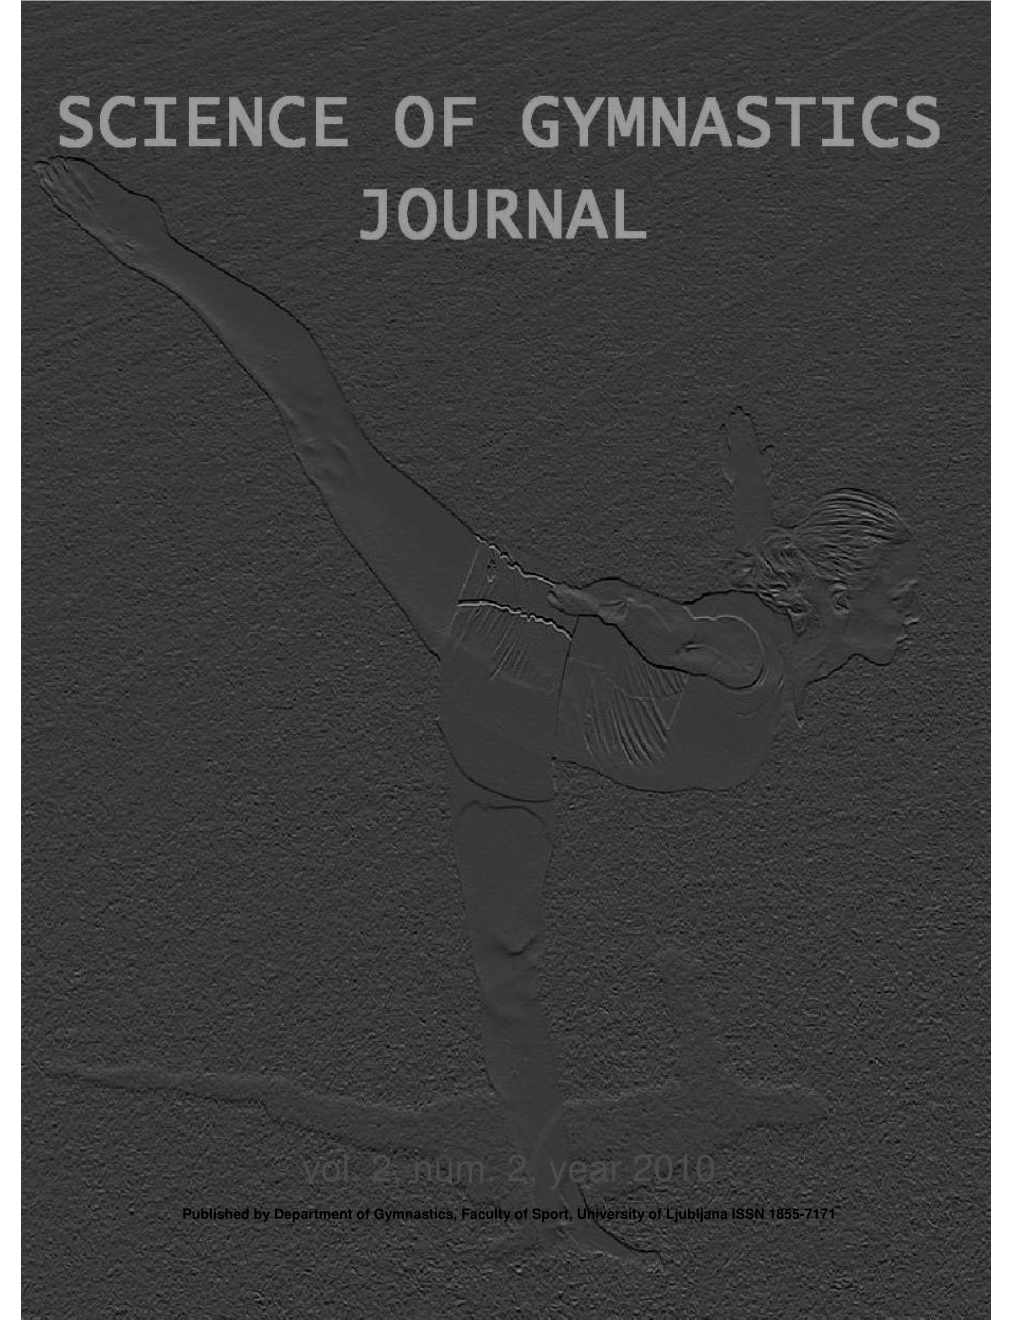 The Whole Science of Gymnastics Journal Vol.2, Num.2, 2010